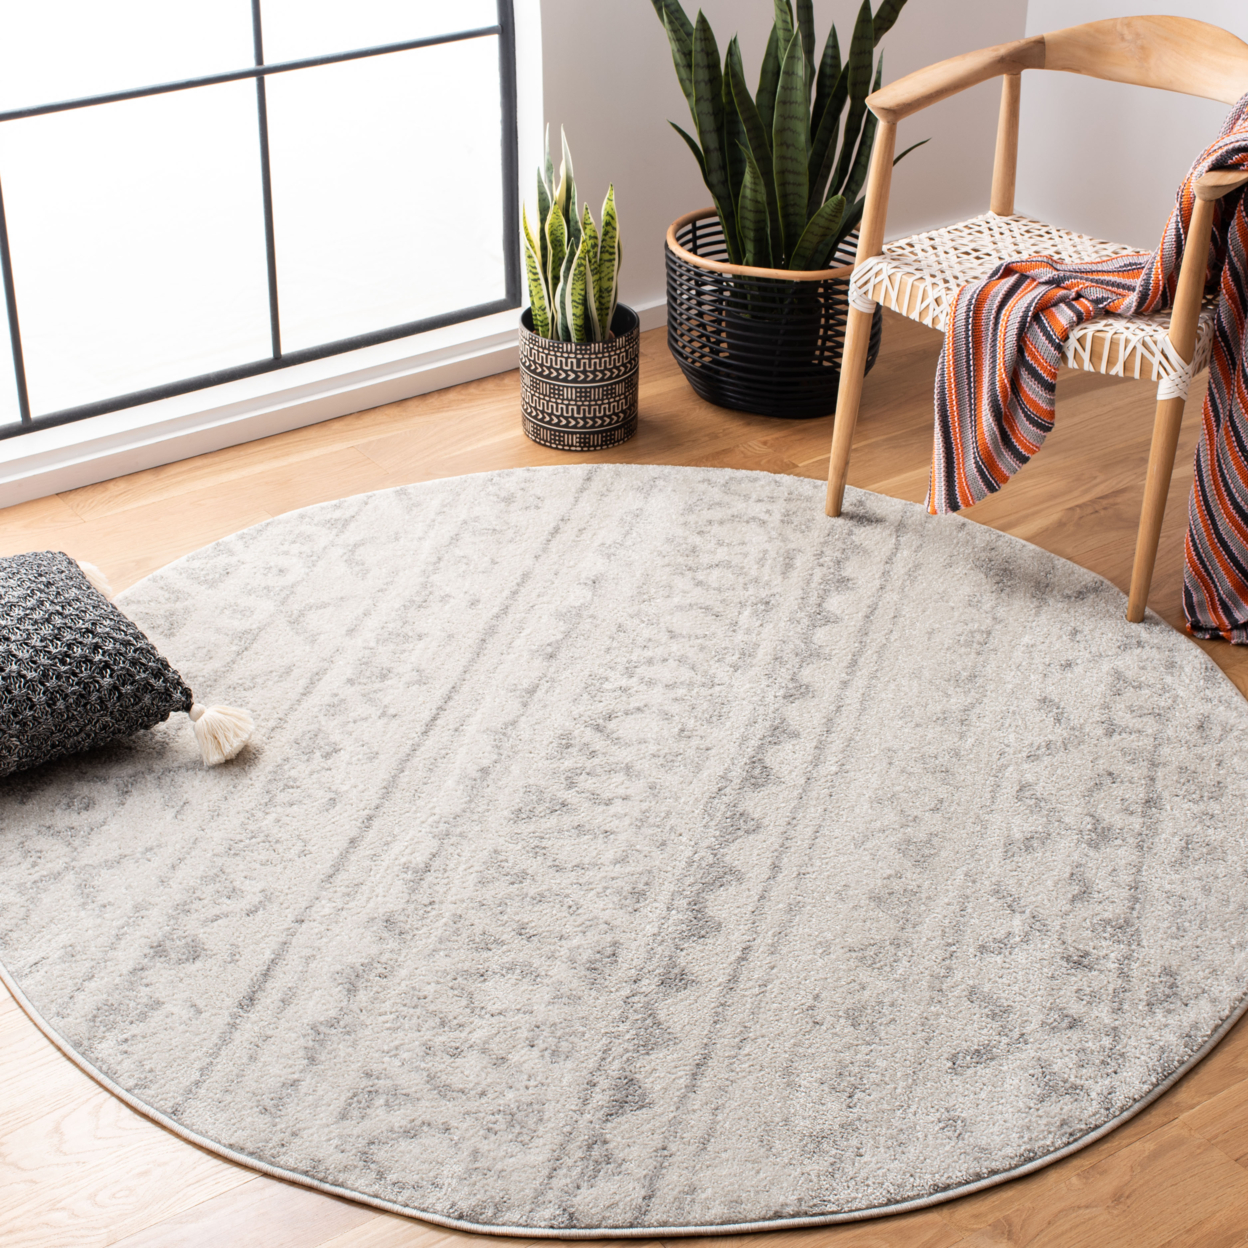 SAFAVIEH Adirondack Collection ADR119A Ivory / Silver Rug - 2' 6 X 4'